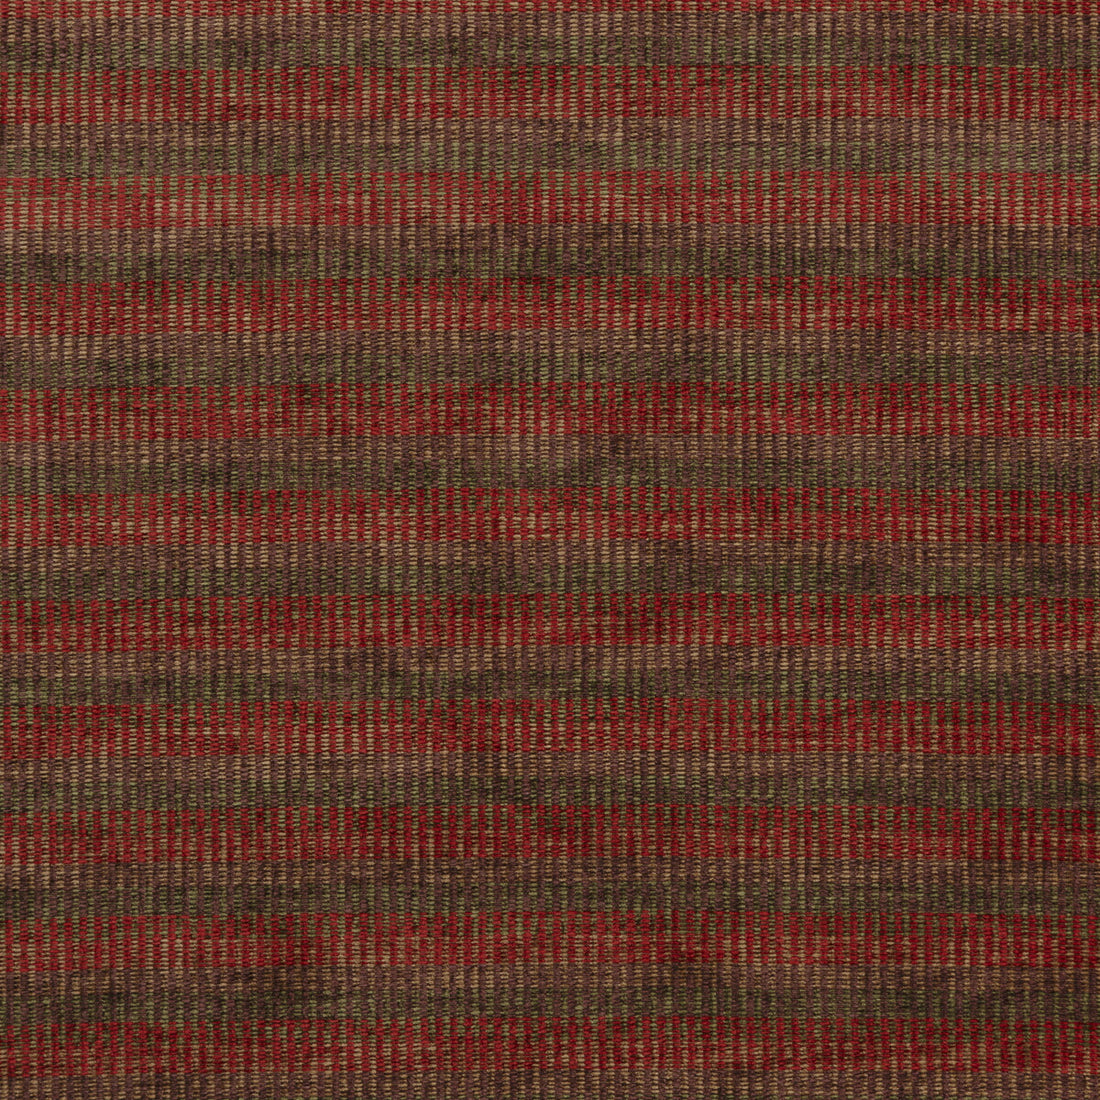 Rattan Chenille fabric in red/green color - pattern FD761.V117.0 - by Mulberry in the Festival collection